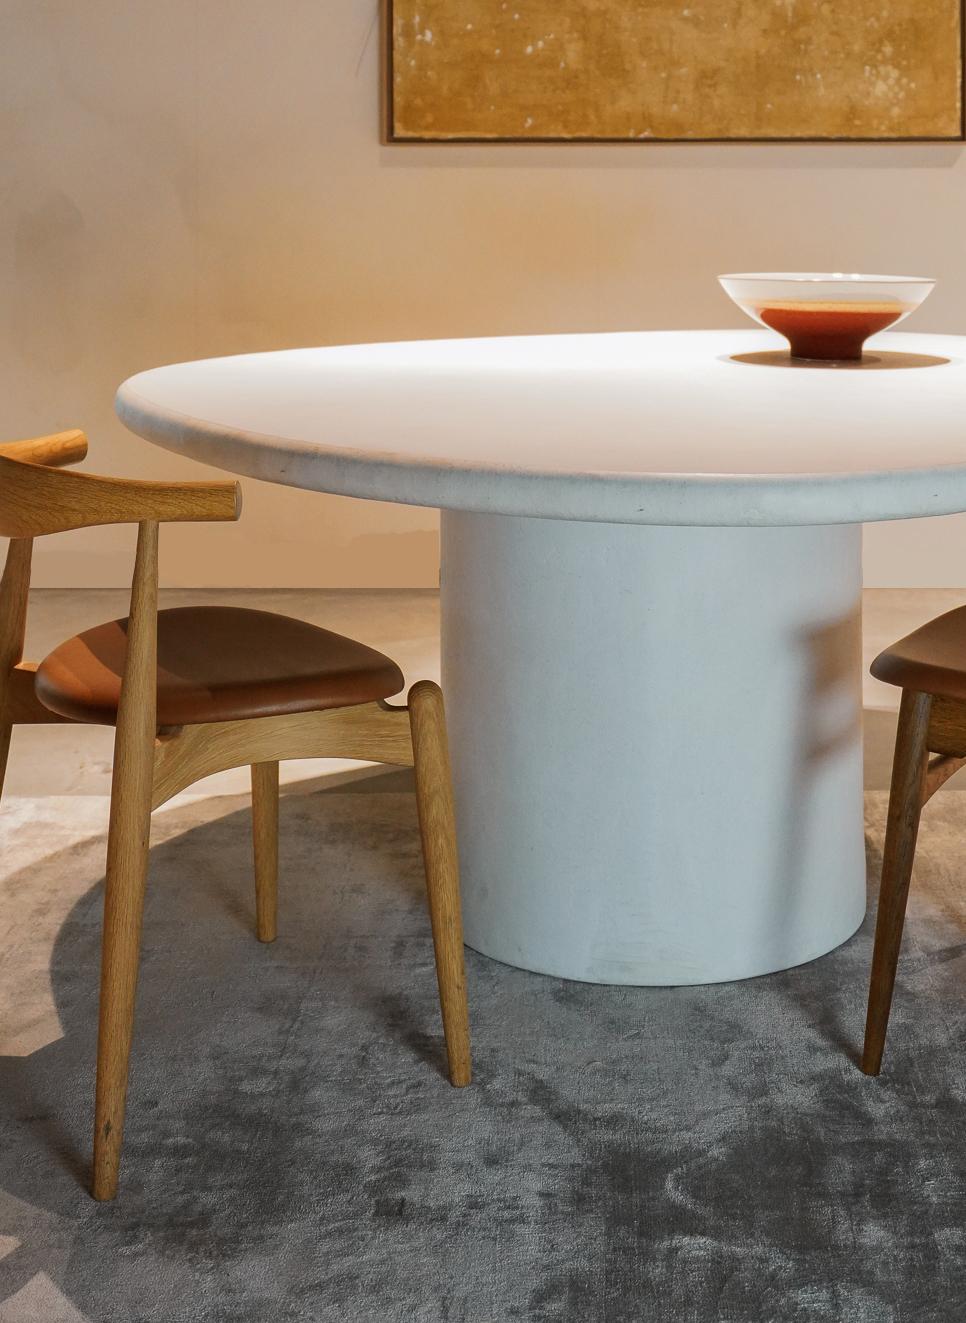 This Liz Tables table is a high quality item that will give you years of pleasure!
The table top is 50 mm thick with rounded edges which gives it that durable and chique look and the quality is greatly improved by making this top 50 mm. 
The